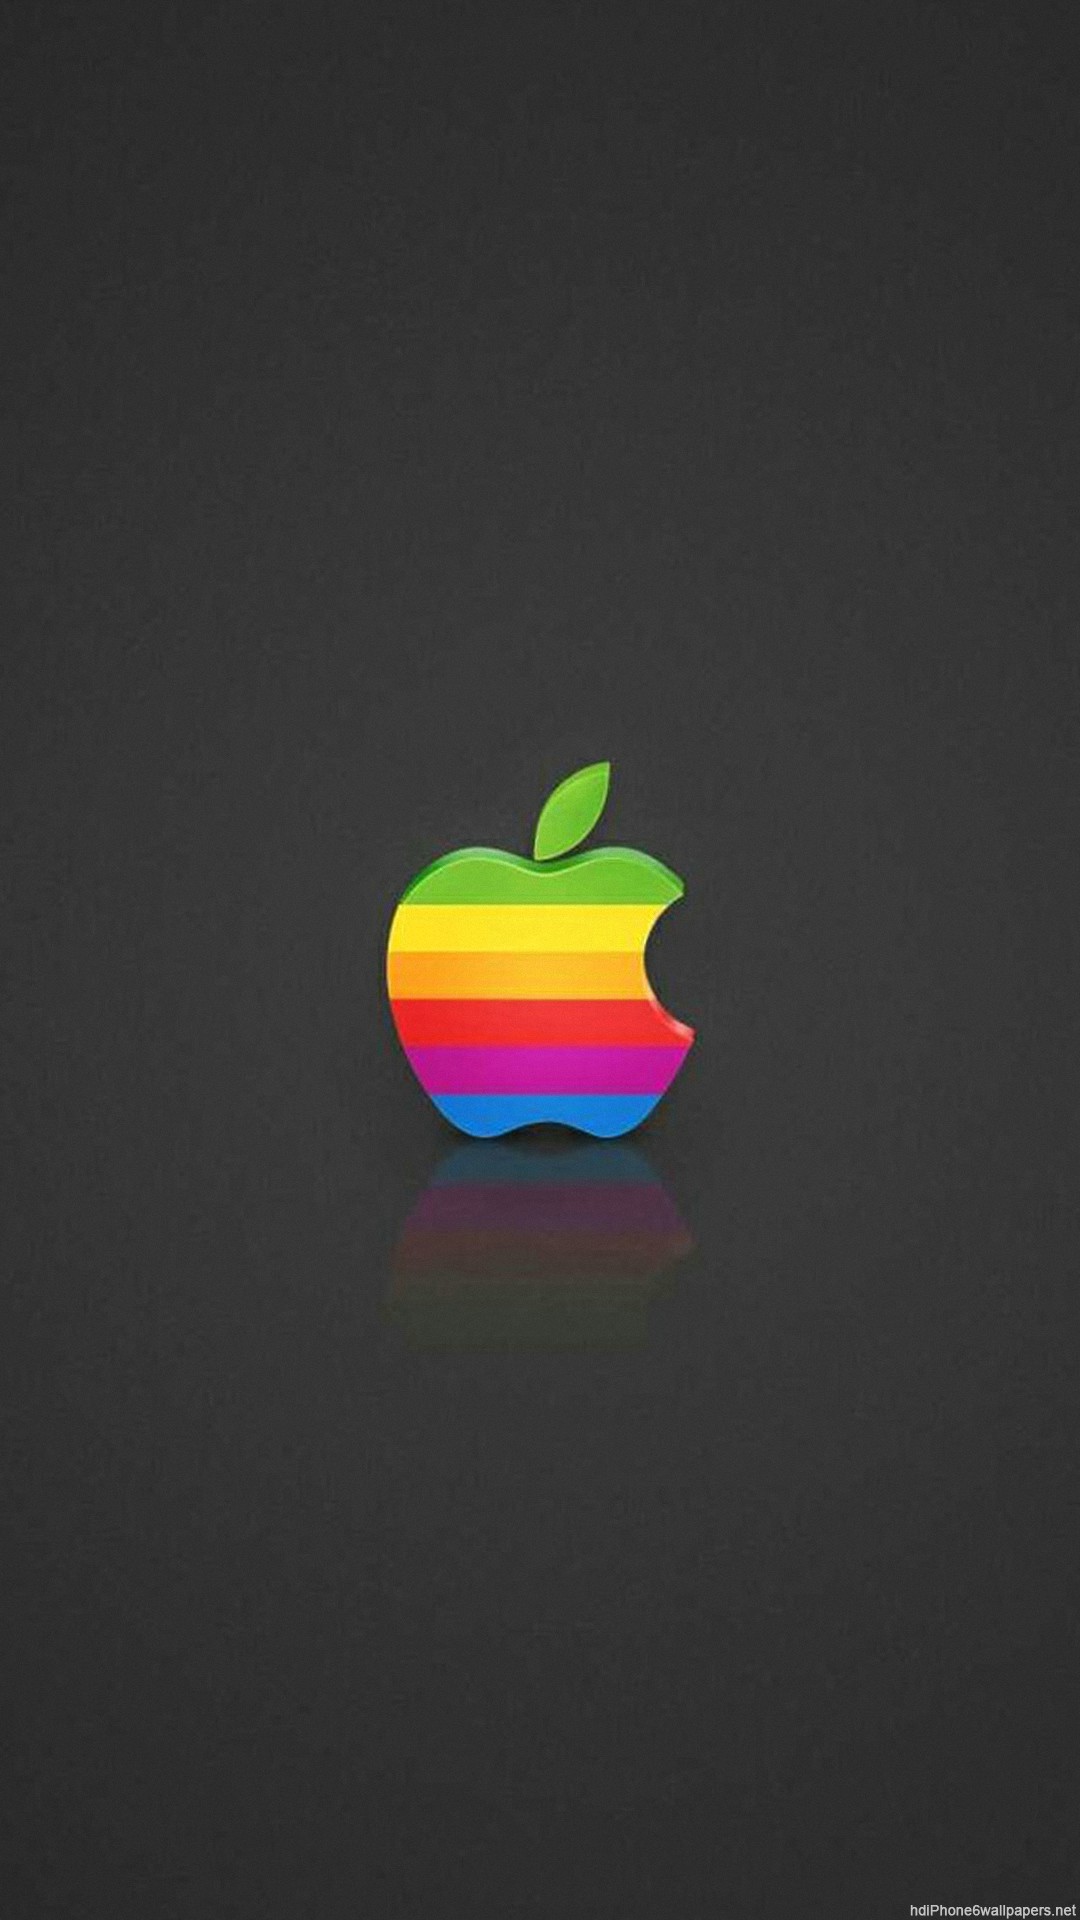 1080x1920  apple color iPhone 6 wallpapers HD - 6 Plus backgrounds